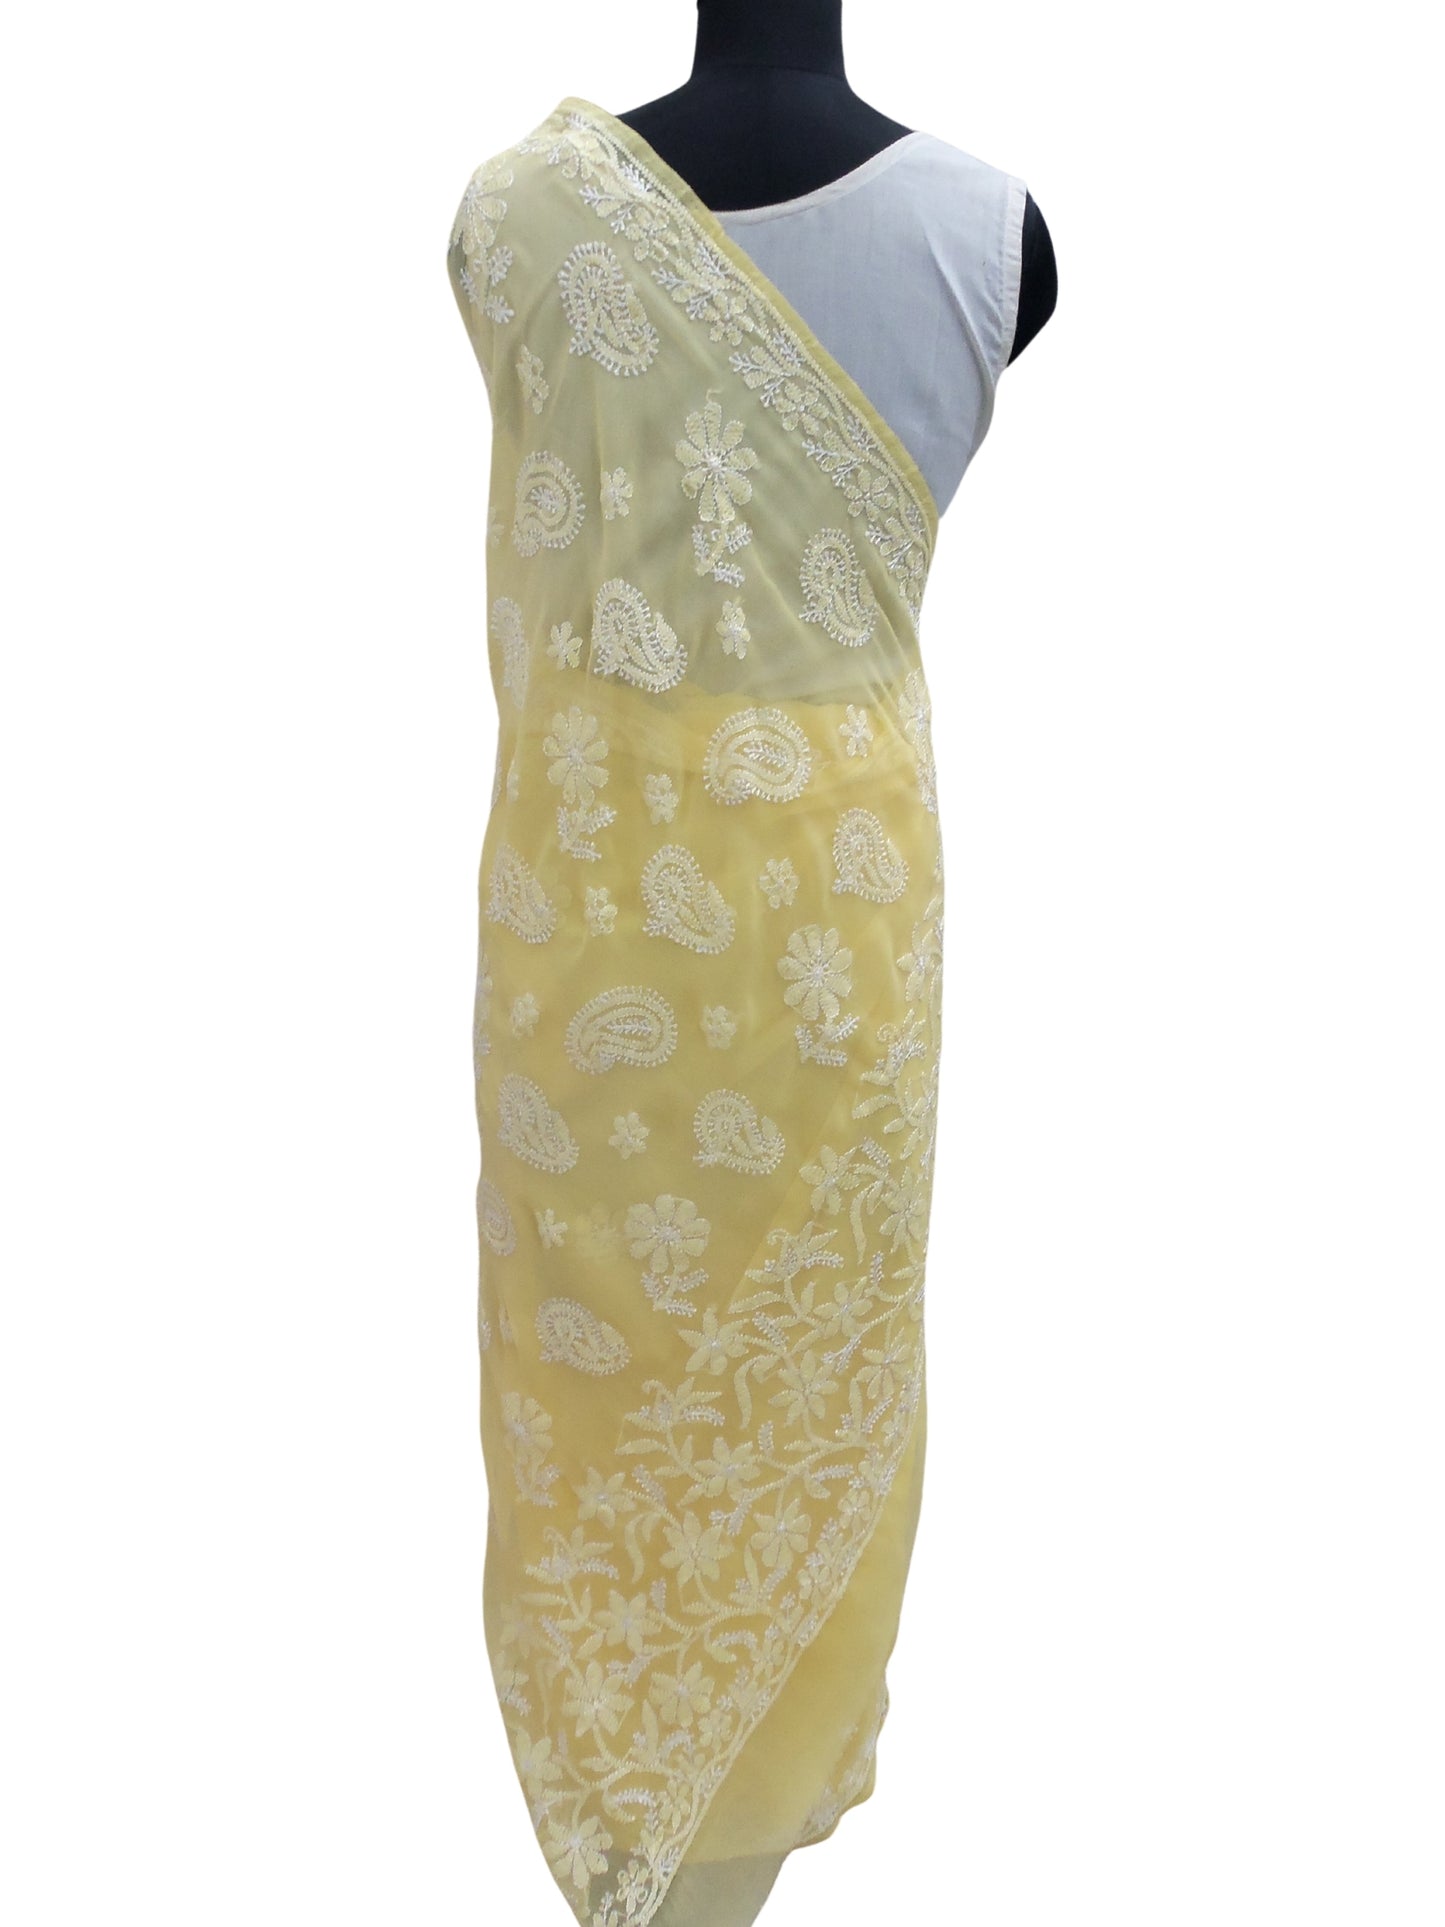 Shyamal Chikan Hand Embroidered Lemon Yellow Georgette Lucknowi Chikankari Saree With Blouse Piece - S4211